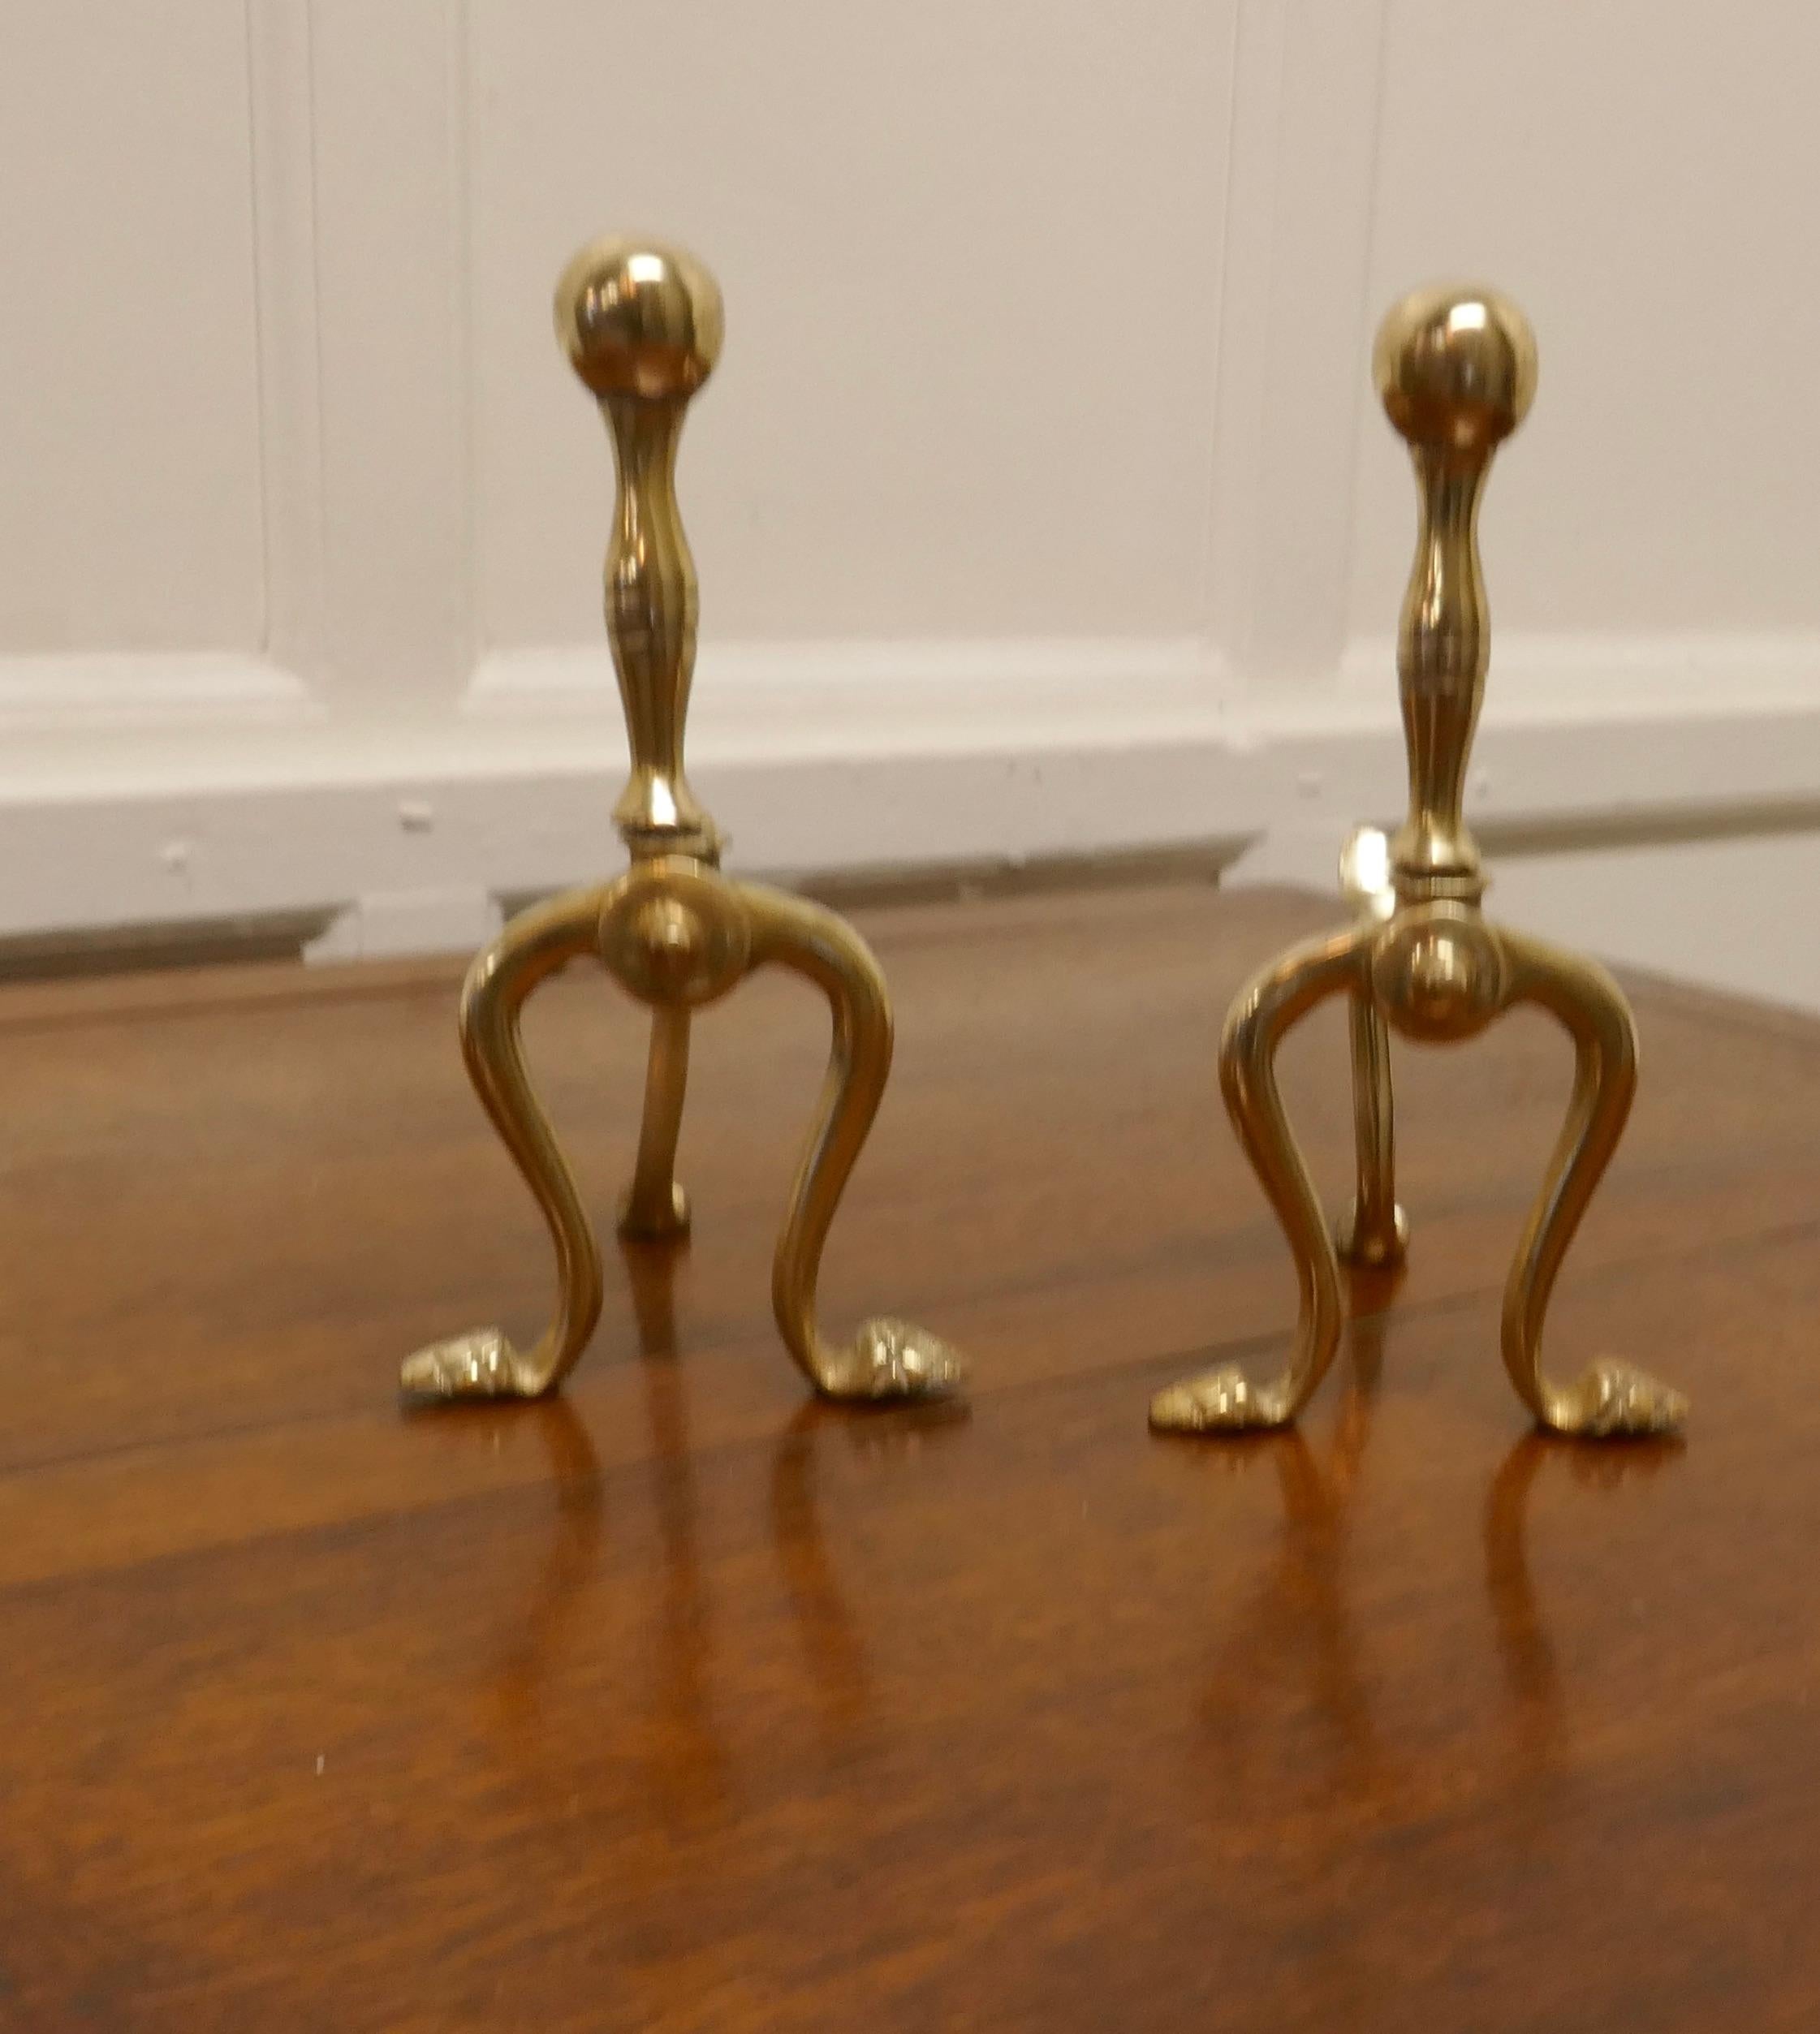 A sturdy pair of Victorian brass andirons or fire dogs


This very attractive pair of brass Andirons is 10” high, 8” long and 5” wide across the front, they are in excellent but obviously used condition, just what you fire tools need to keep them